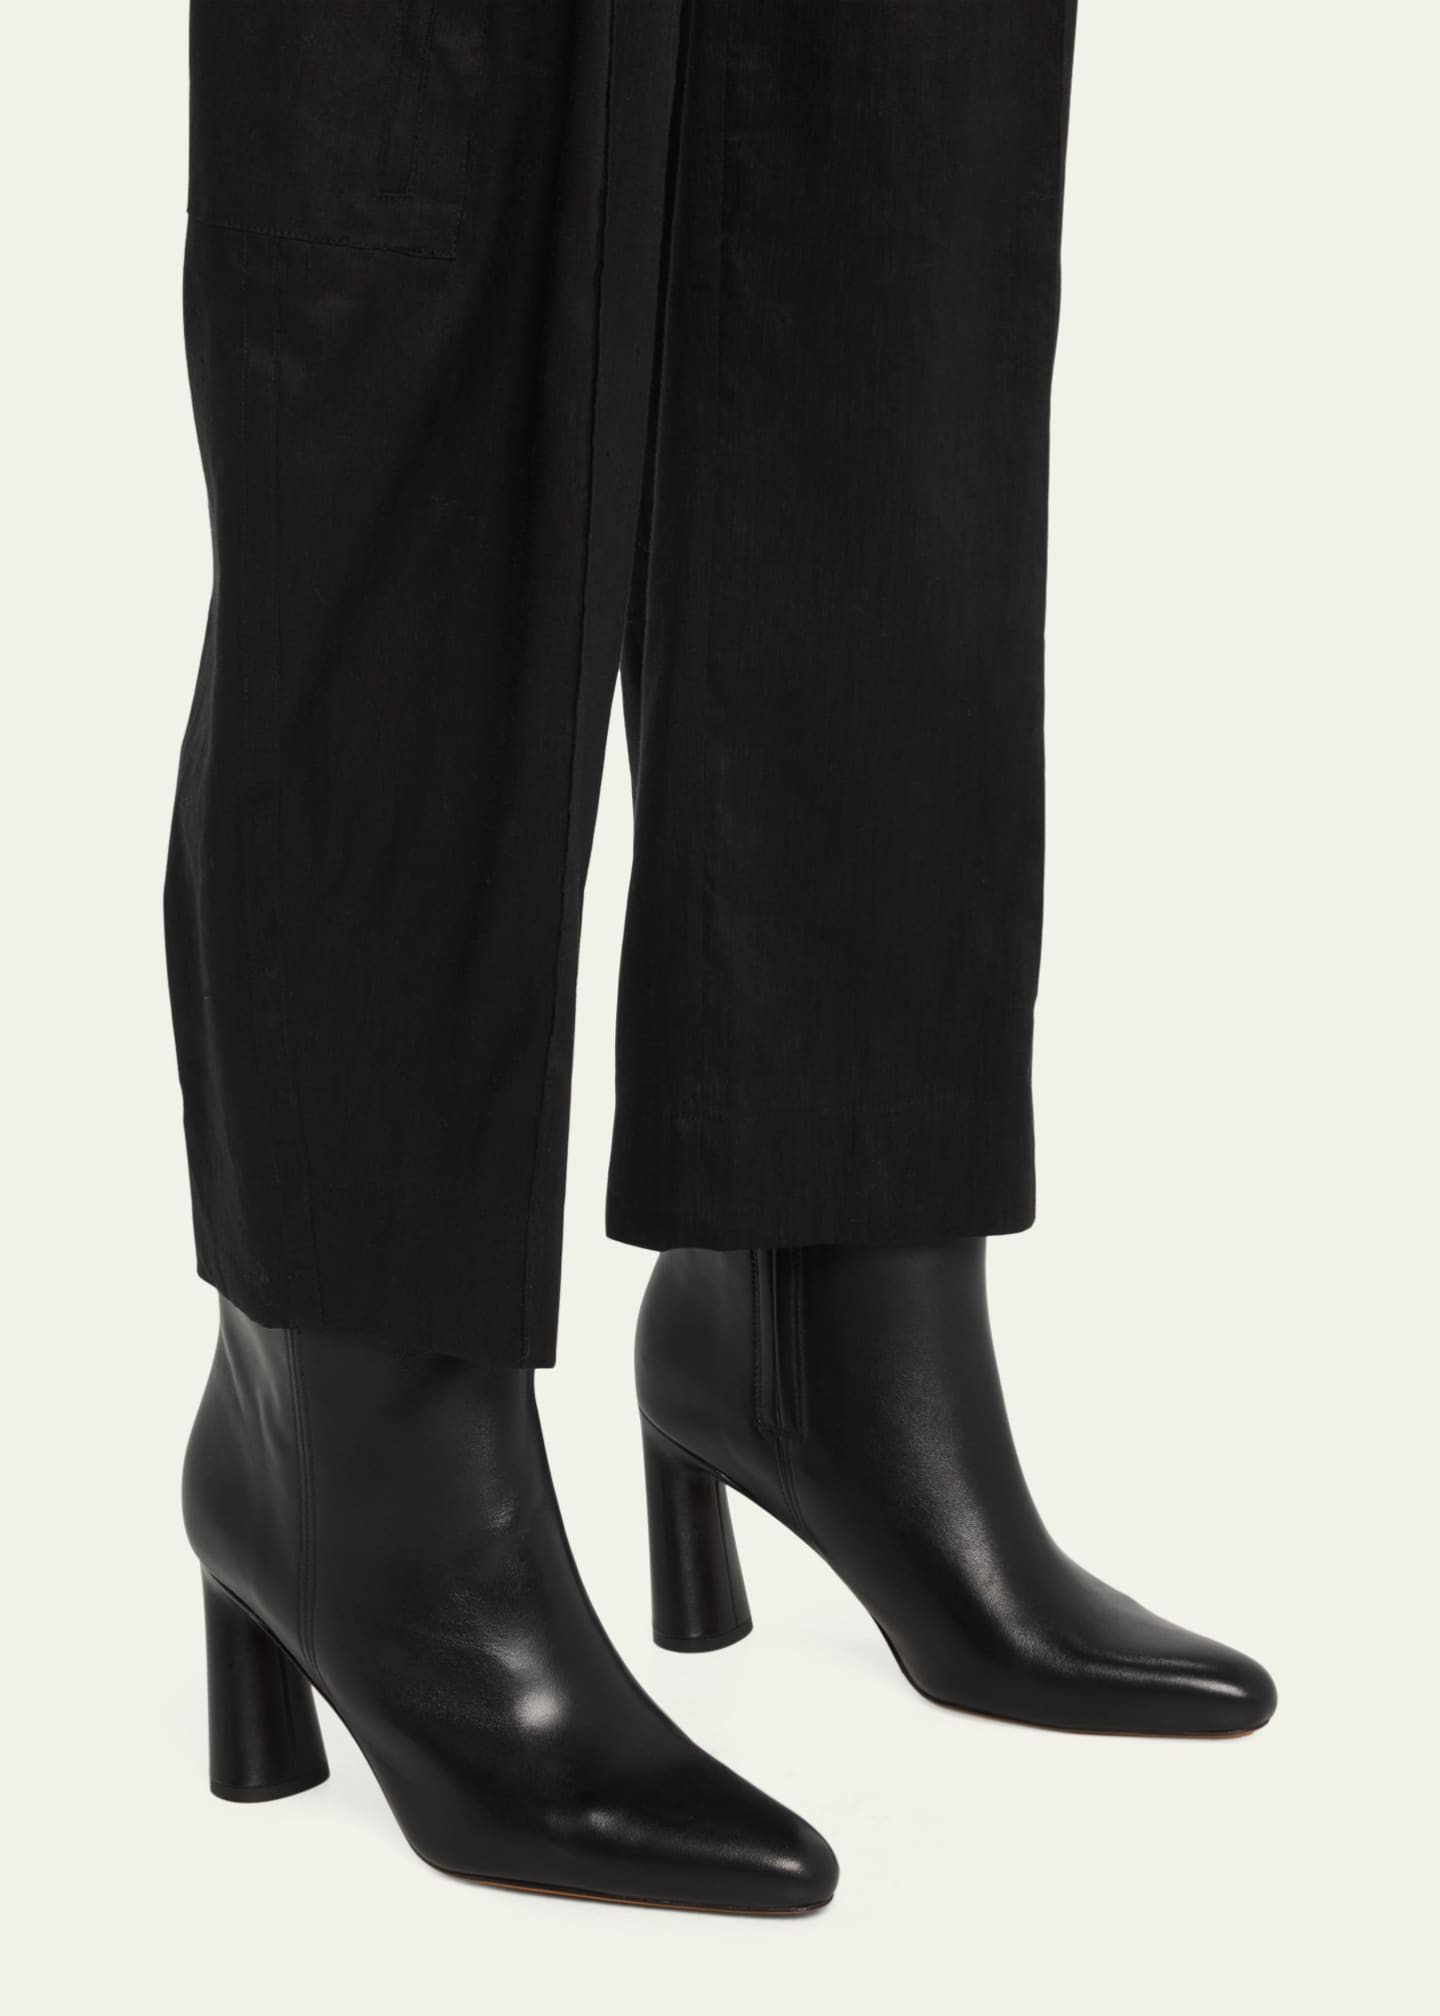 Vince Hillside Leather Ankle Booties - Bergdorf Goodman